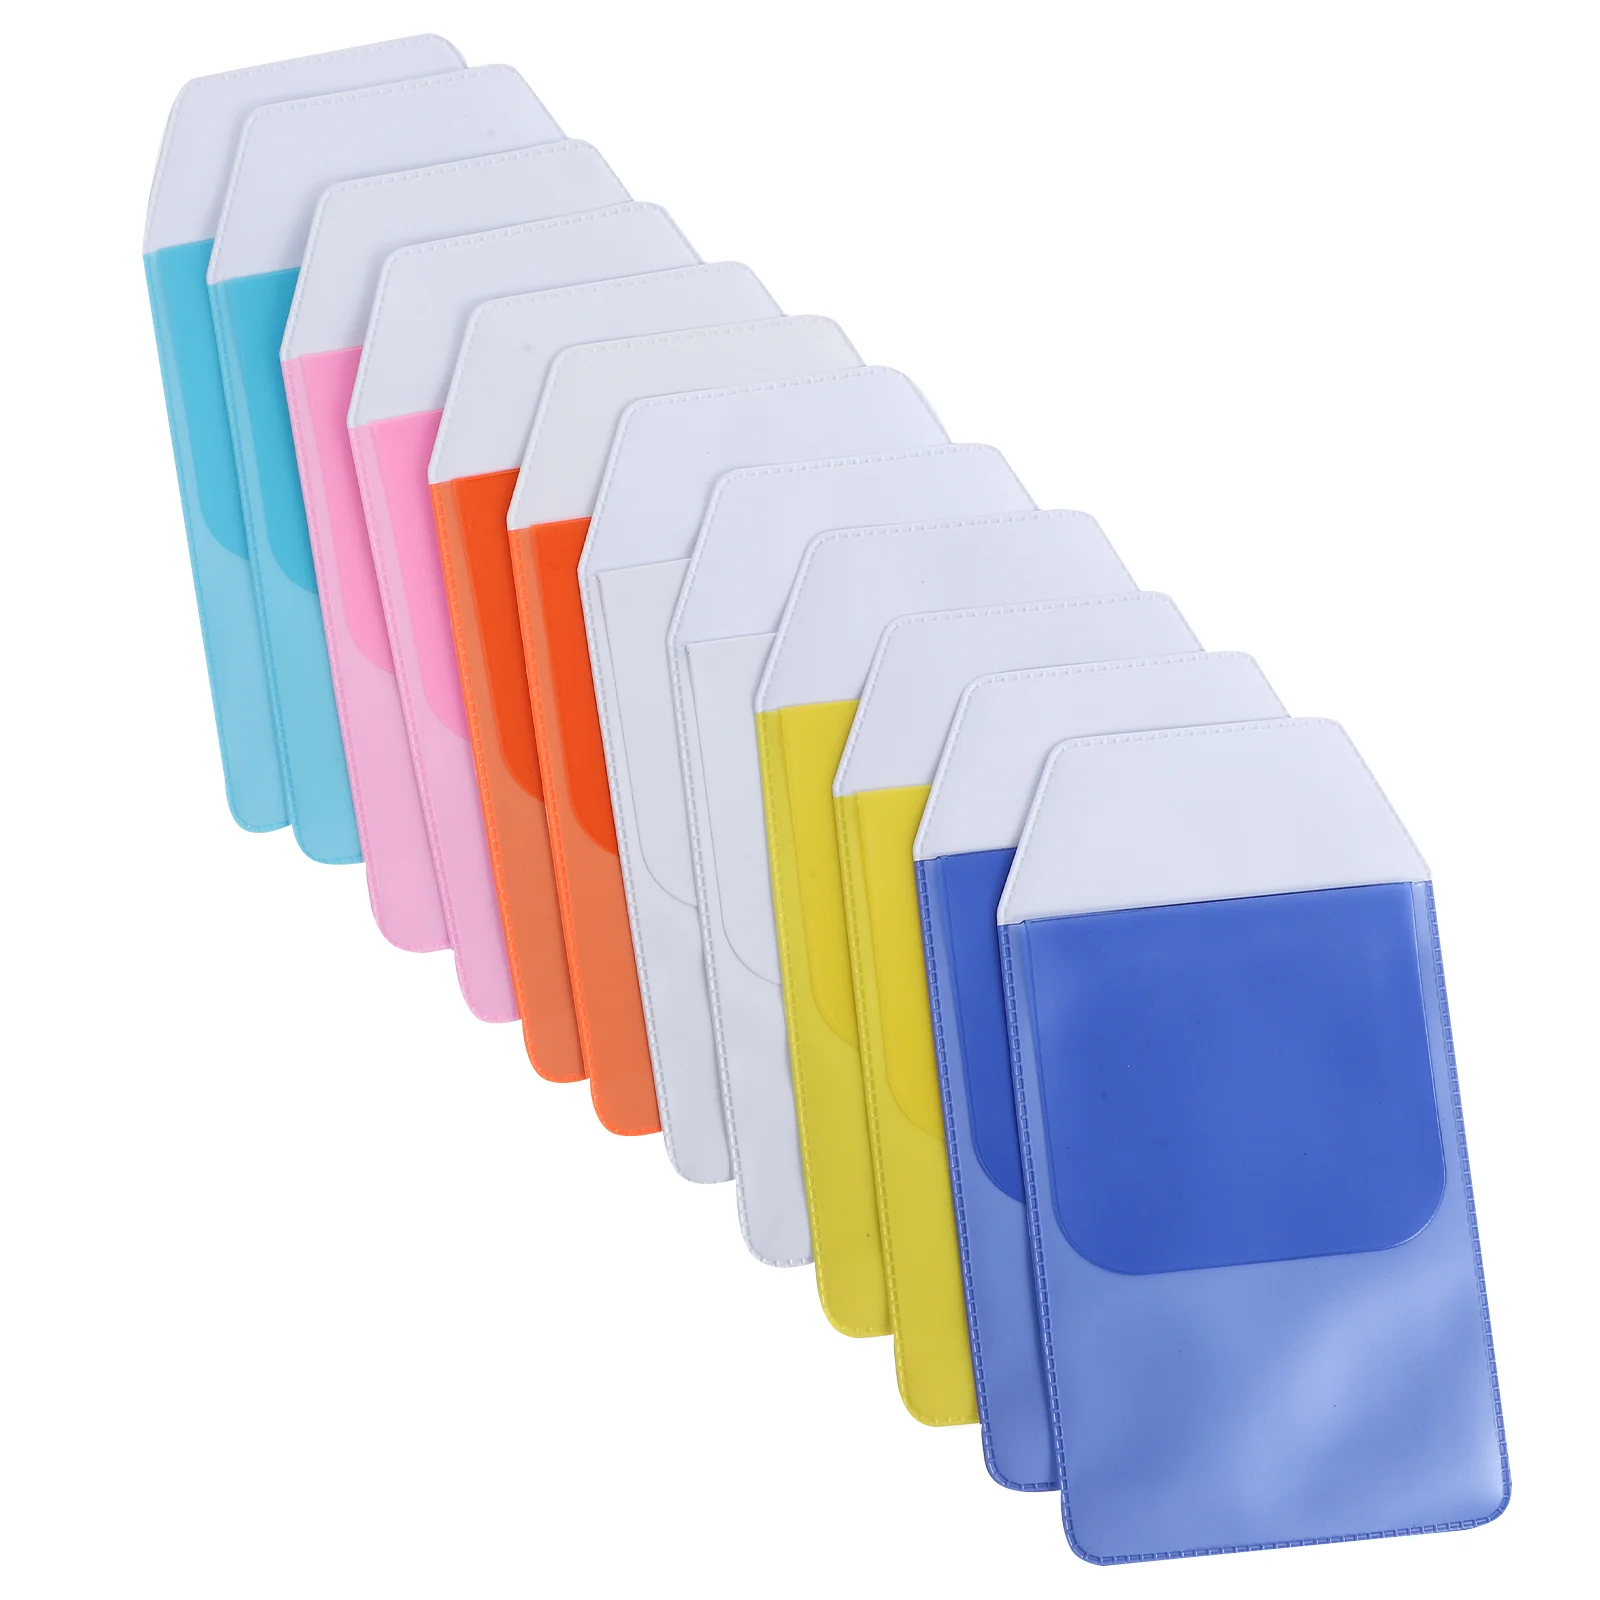 

12 Pcs Pencil Case Inserted Bag for Nurses Doctor Pouch Protector Gift Daily Use Fishing Accessories Leak-Proof Office PVC Bags